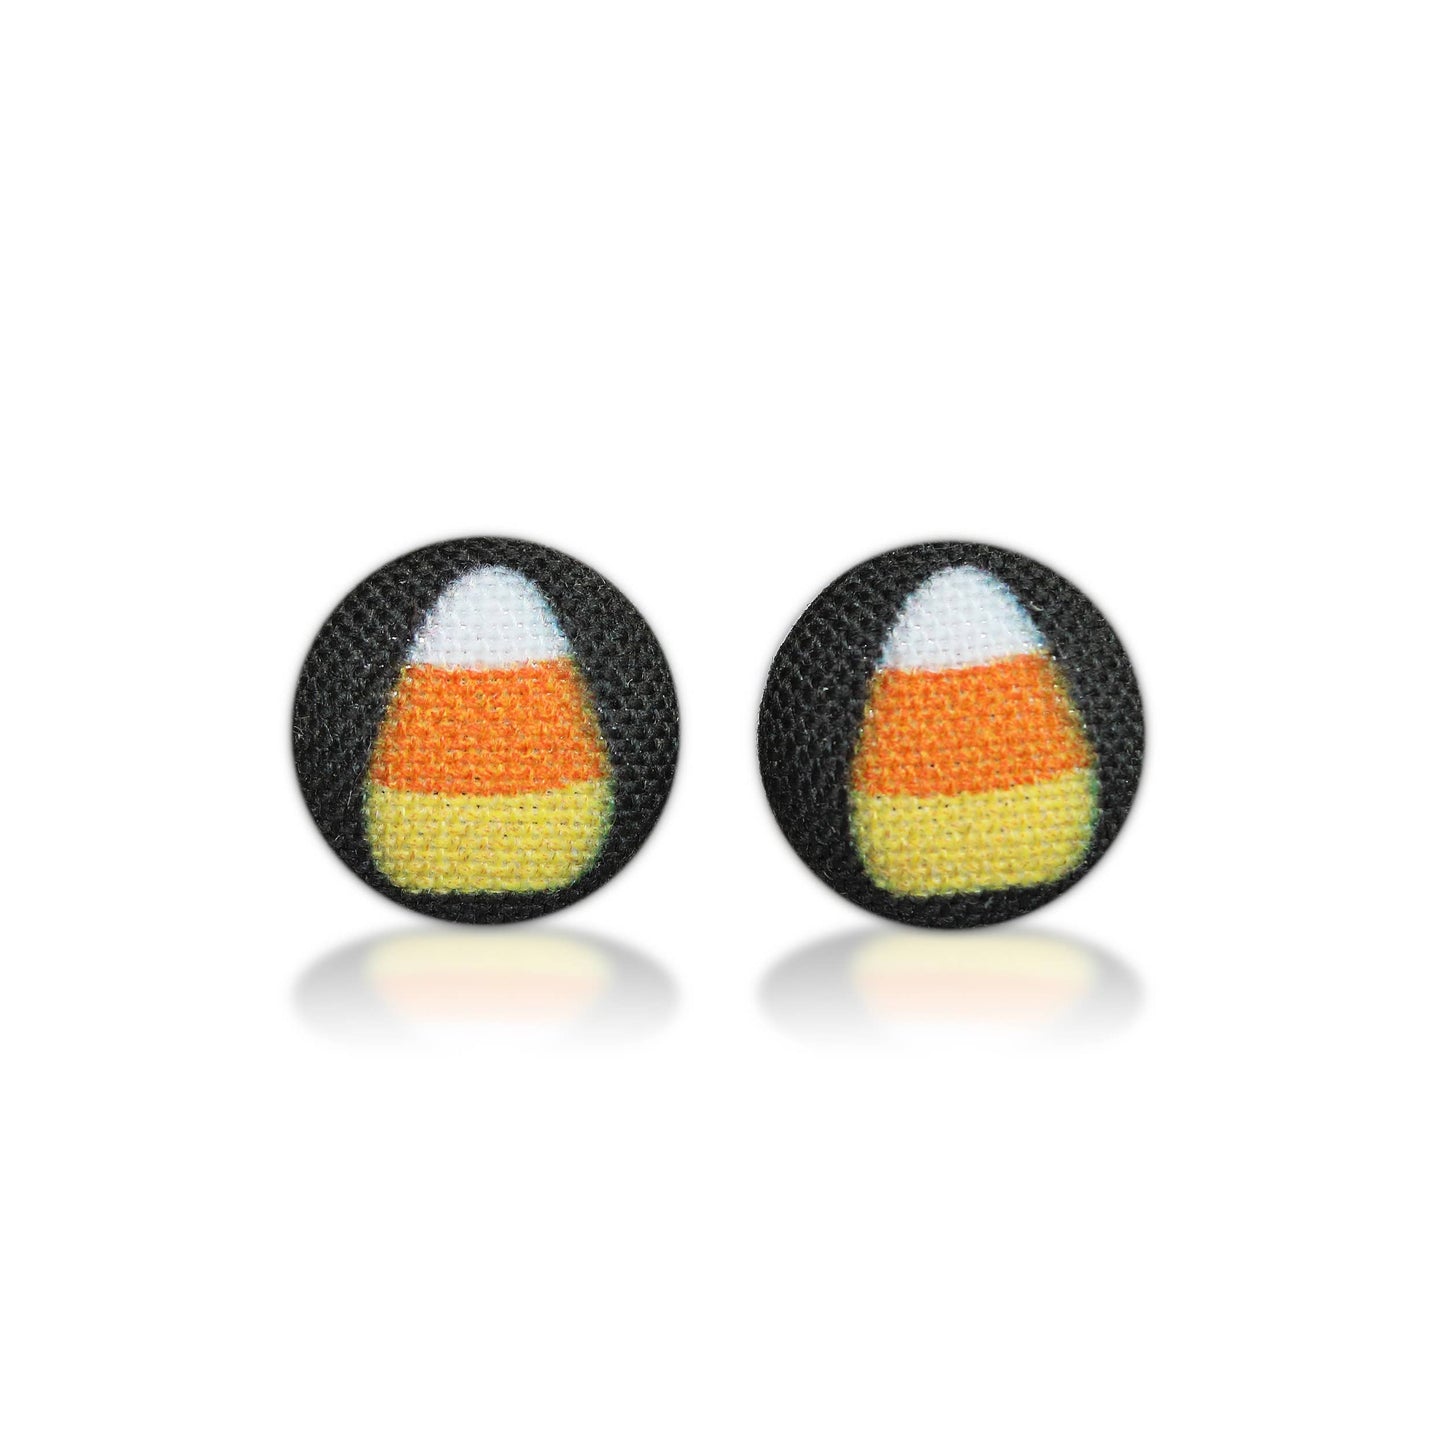 Candy Corn (small) Fabric button Stud EarringsPink tiful of LOVE